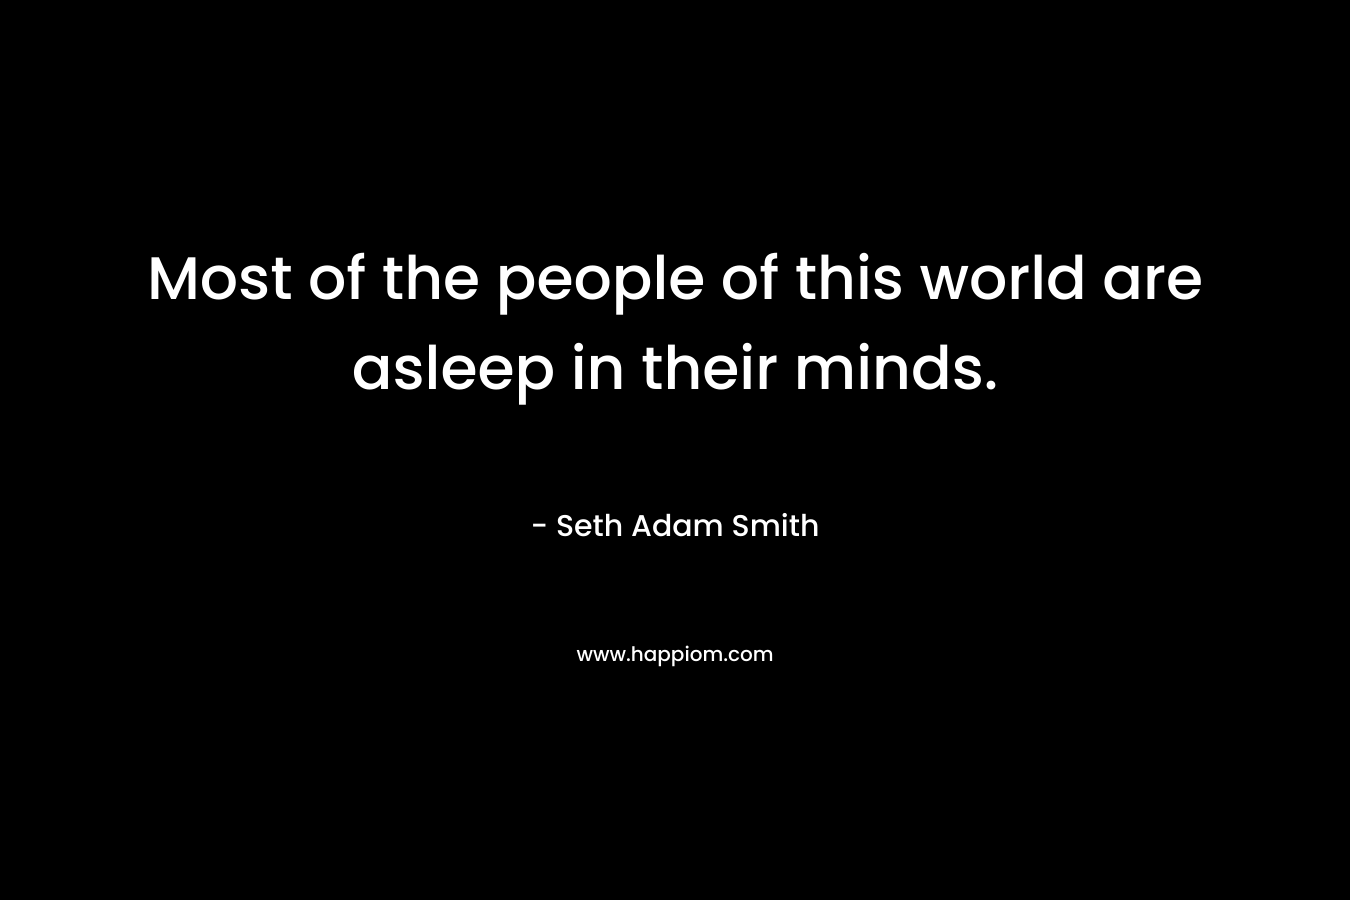 Most of the people of this world are asleep in their minds. – Seth Adam Smith